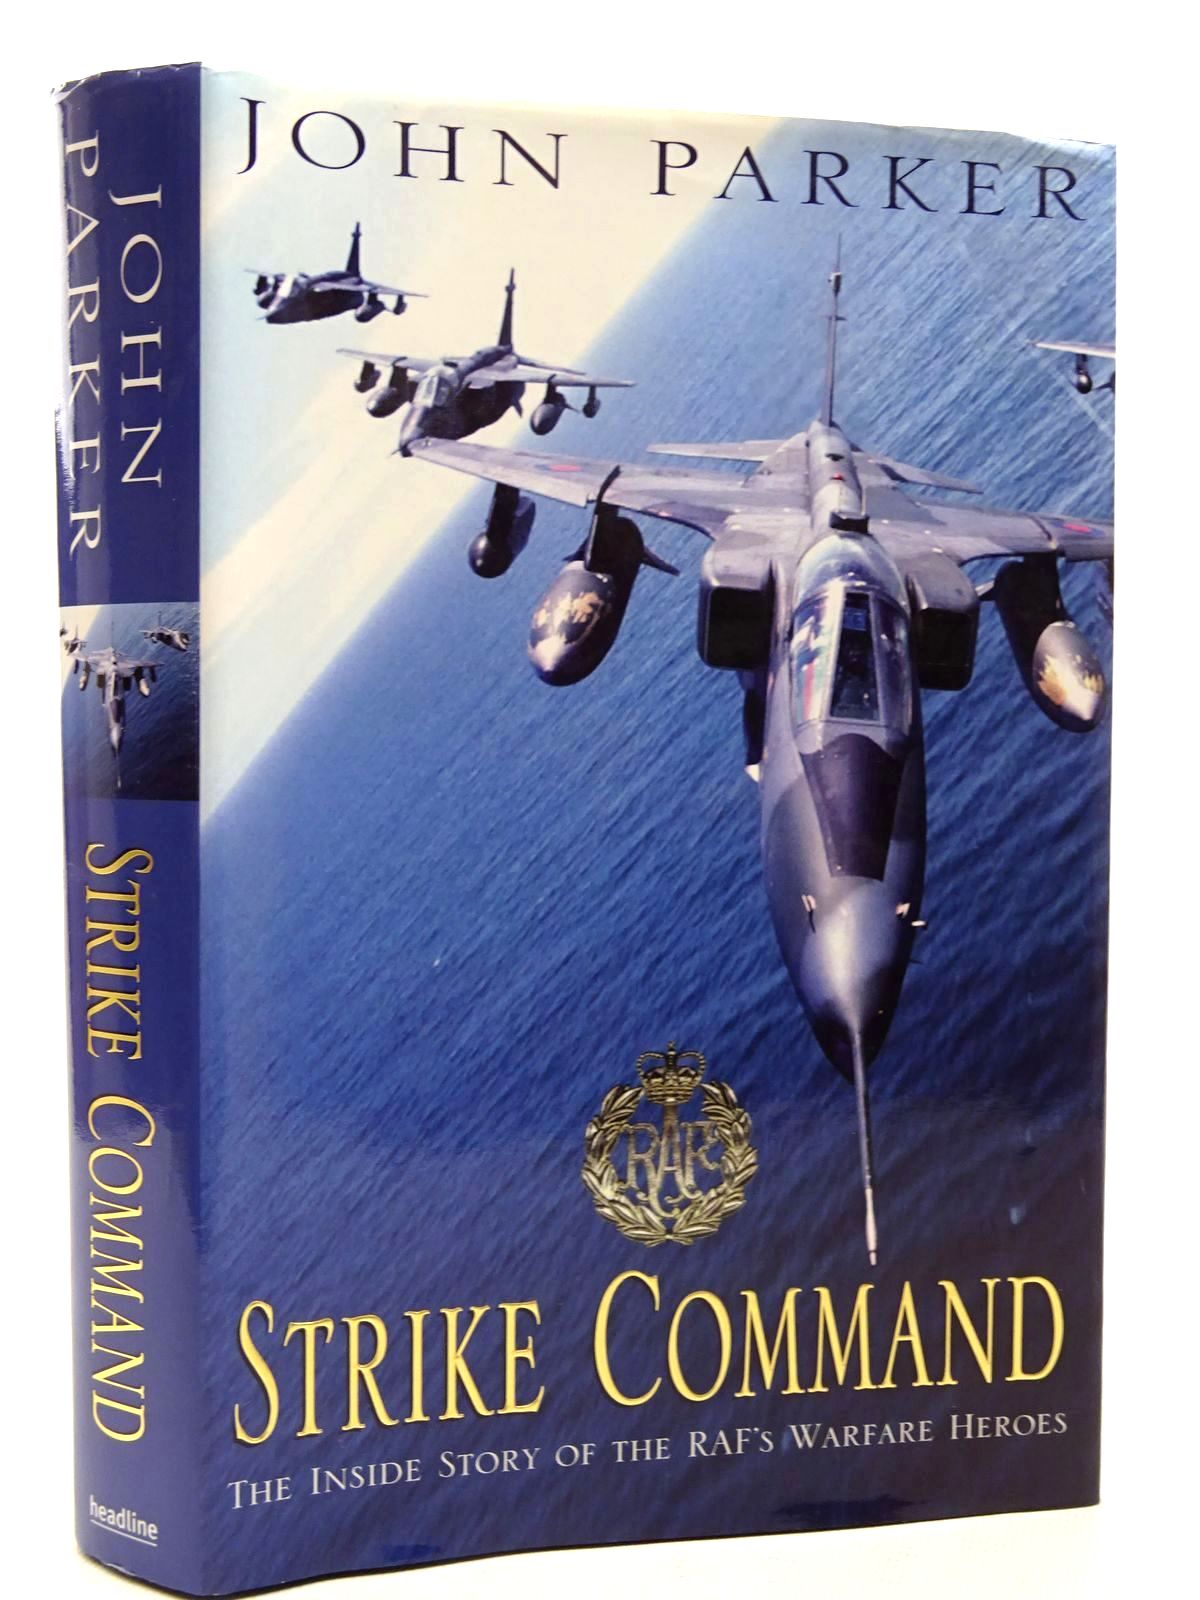 Photo of STRIKE COMMAND: THE INSIDE STORY OF THE RAF'S WARFARE HEROES written by Parker, John published by Headline (STOCK CODE: 1815882)  for sale by Stella & Rose's Books